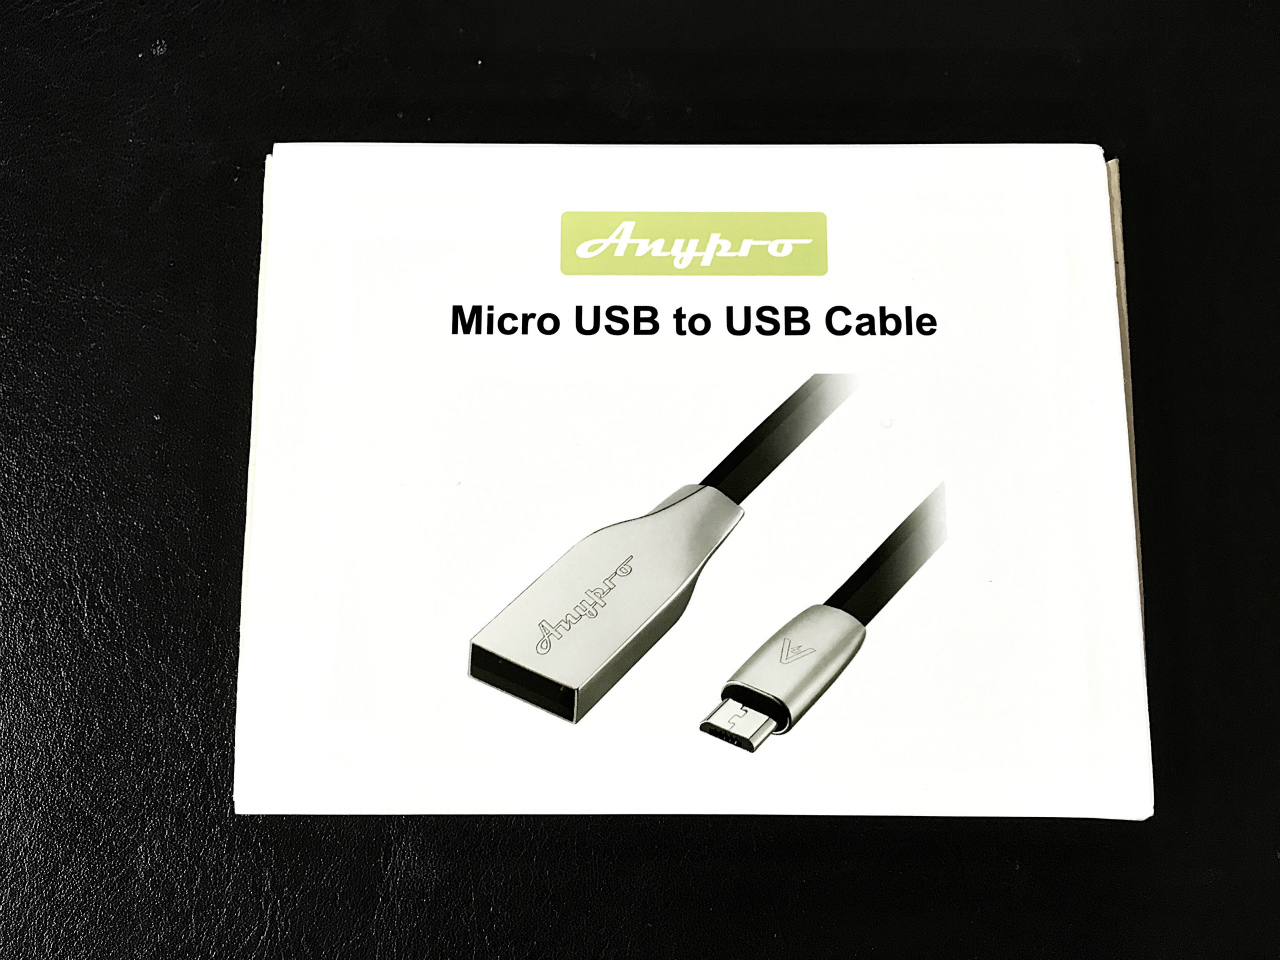 pr-anypro-microusb-cable-01